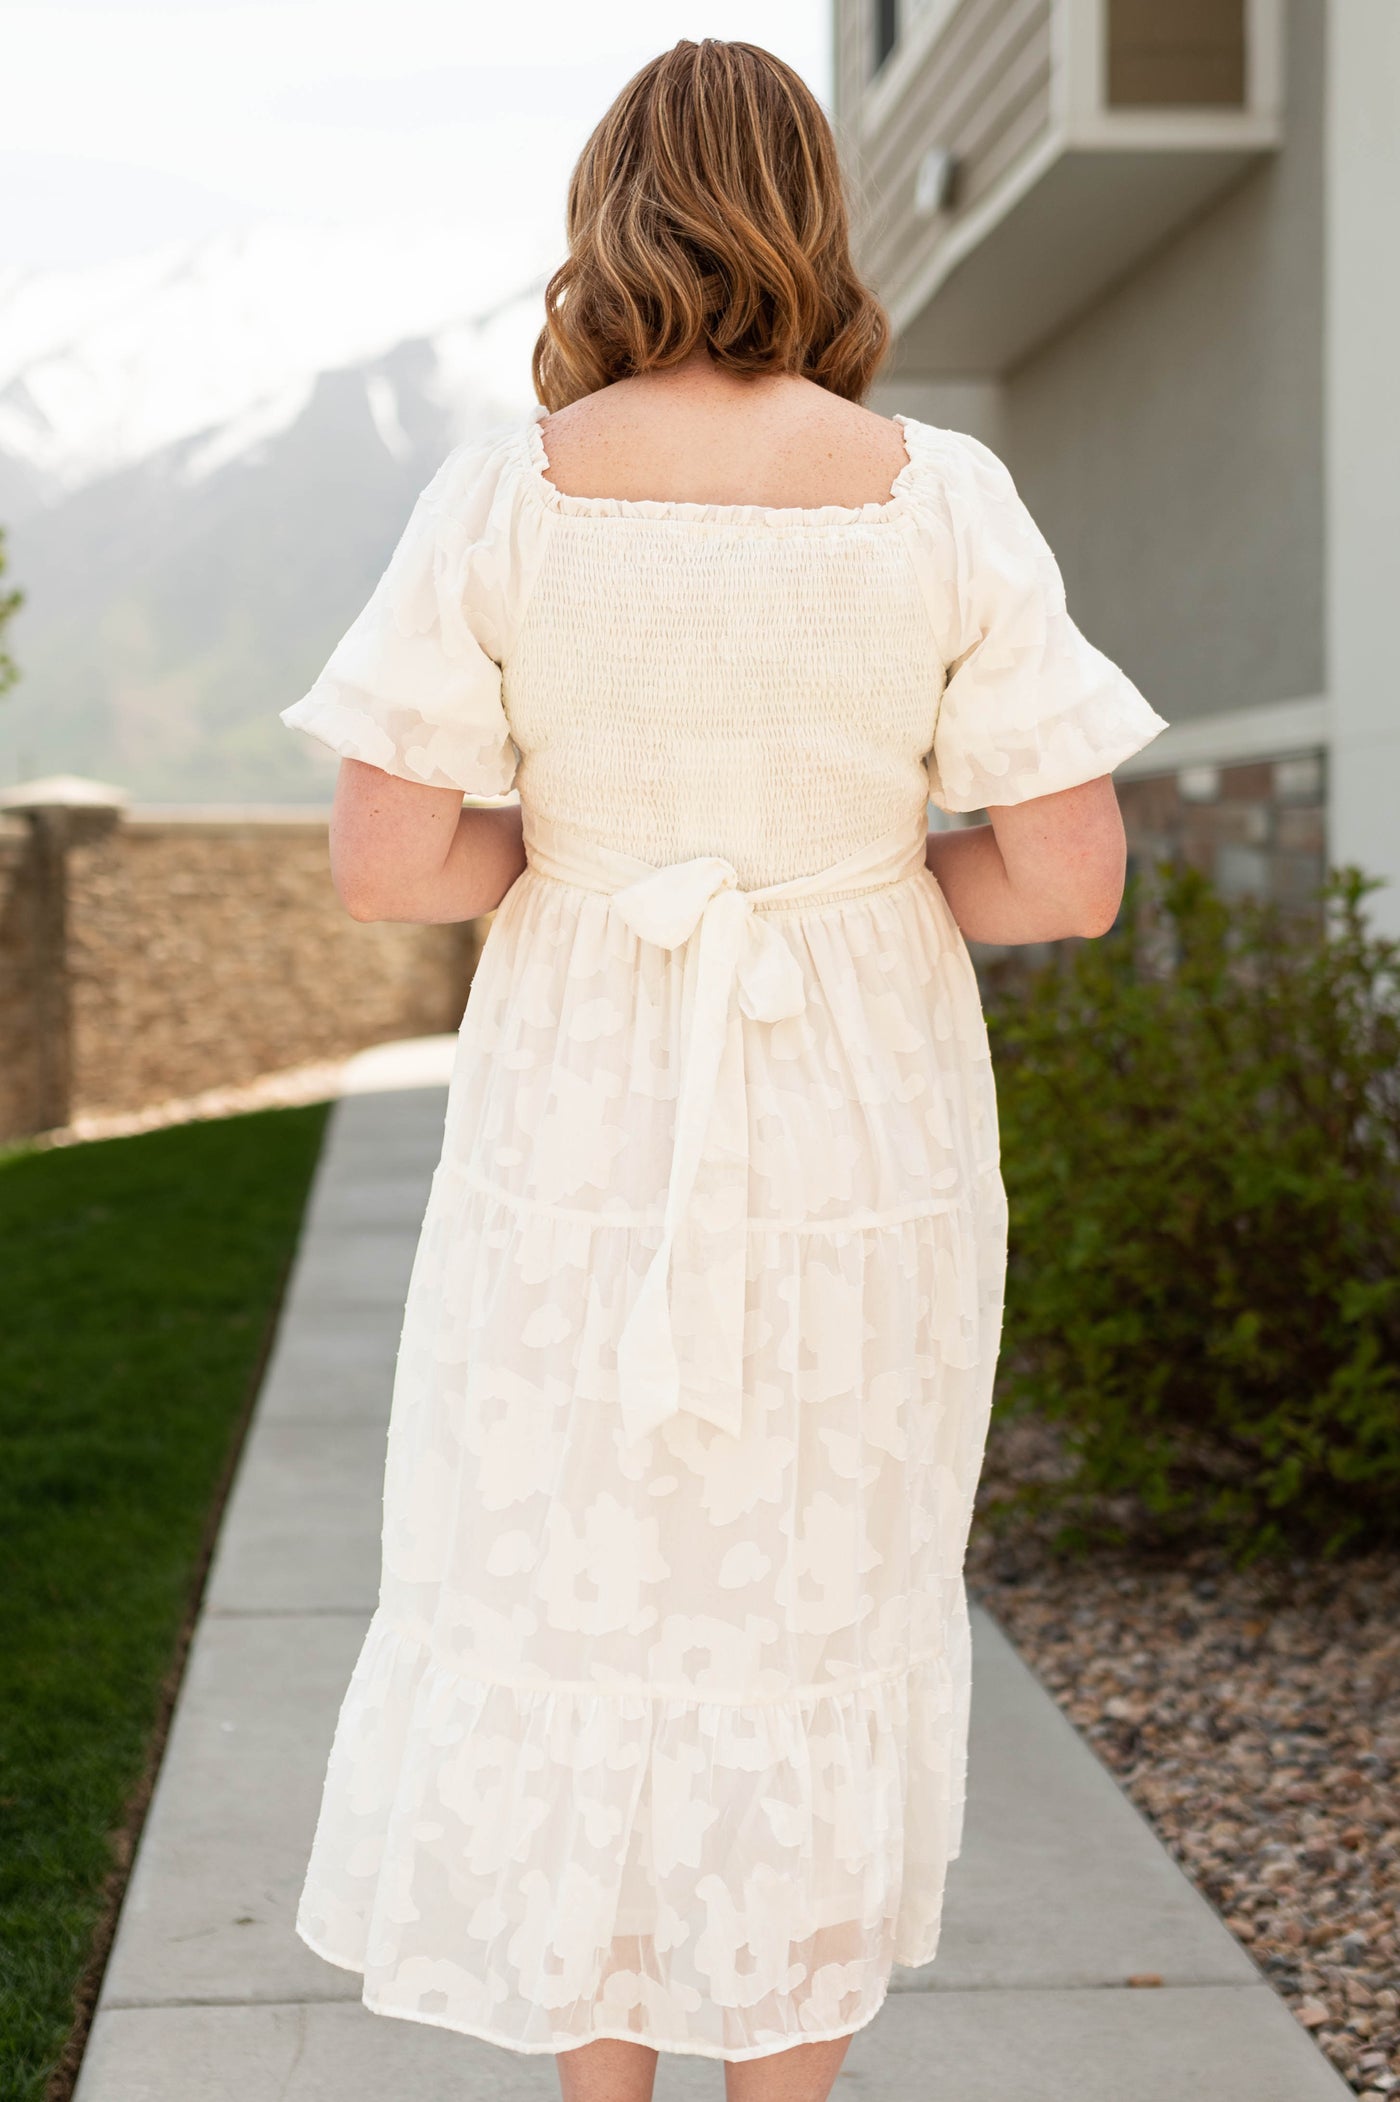 Back view of a white dress with flower print fabric, short sleeves and smocked bodice